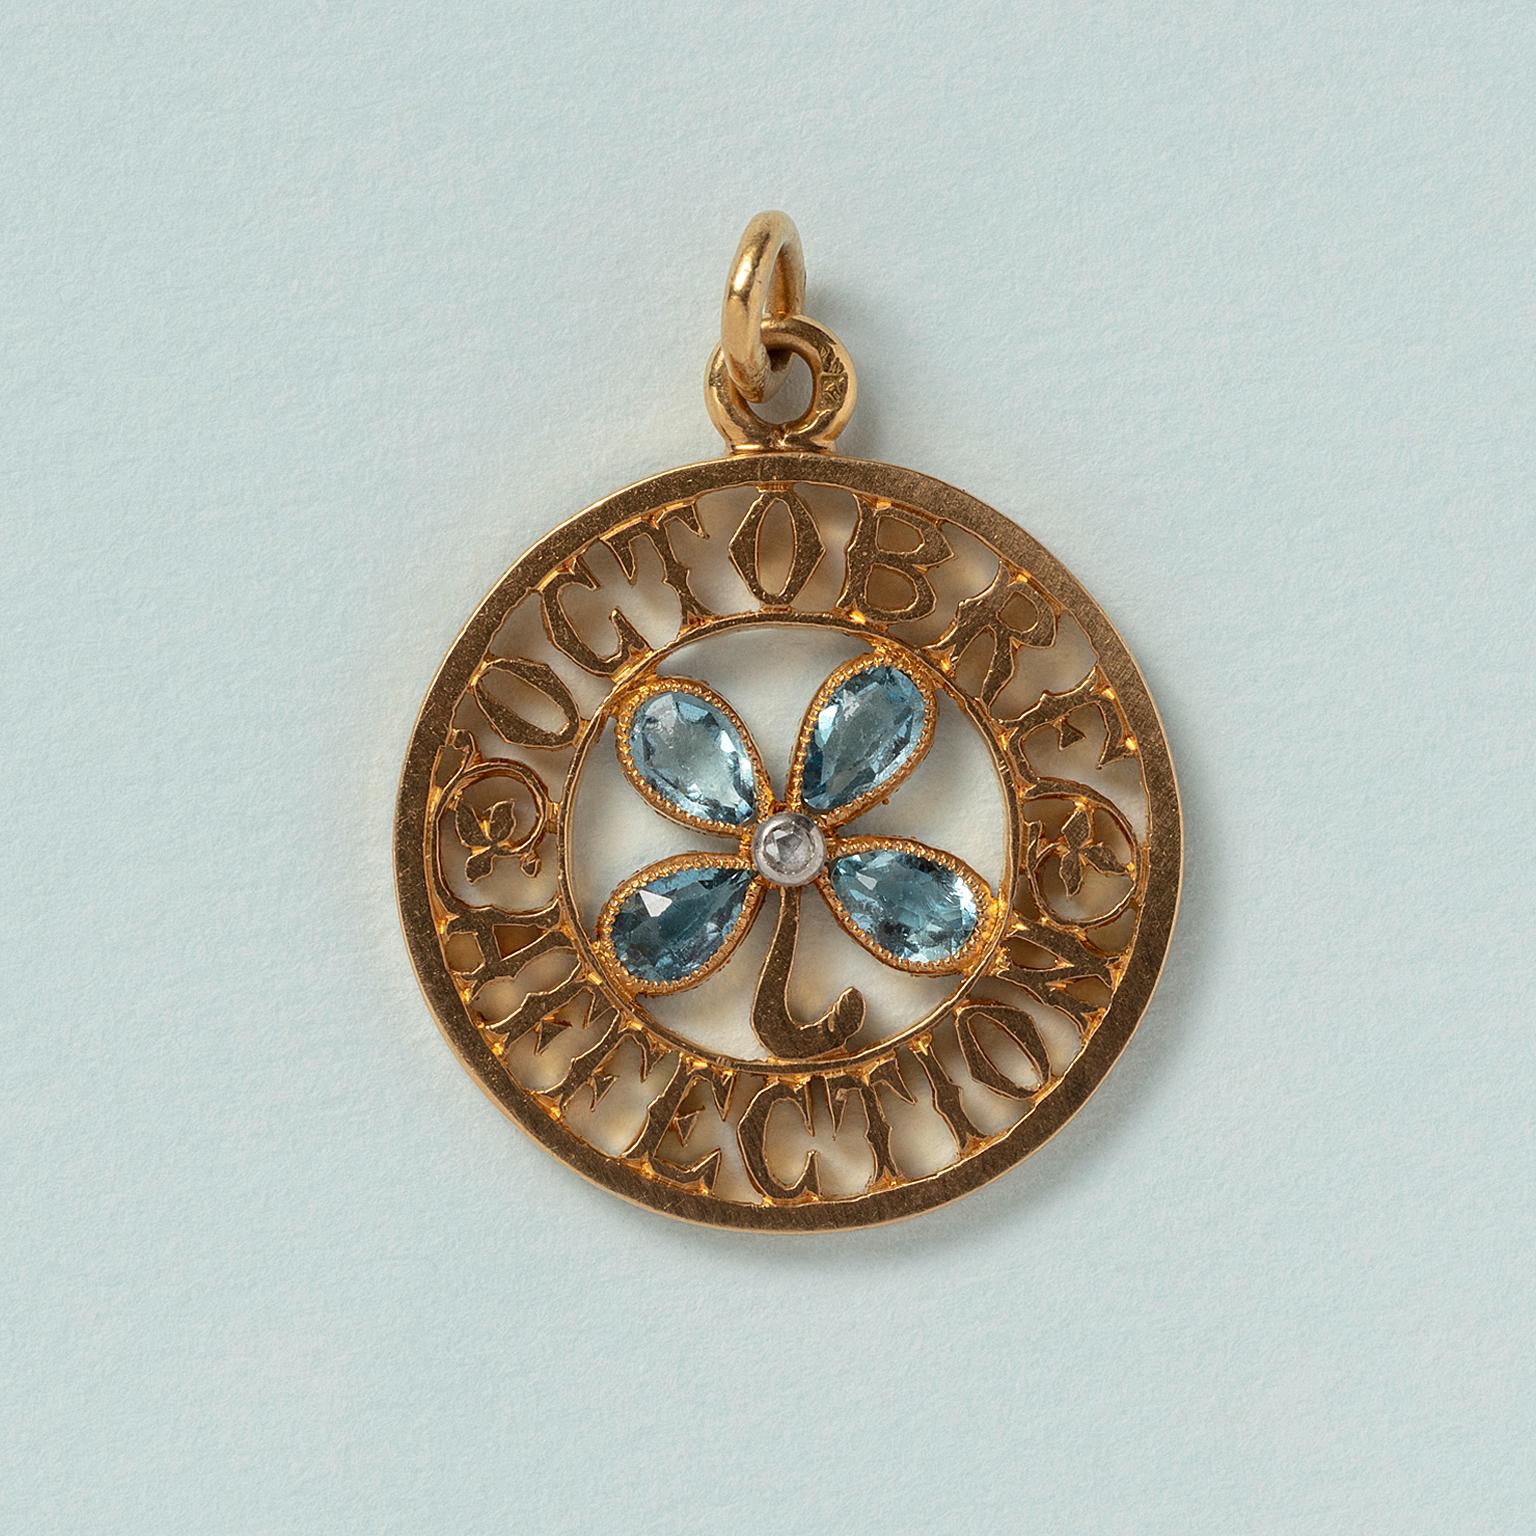 An 18 carat gold charm with a clover four with aquamarine petals and a diamond heart with the text 'Octobre Affection', France circa 1910.

weight: 3.8 grams
dimensions: 2.4 x 2.0 cm